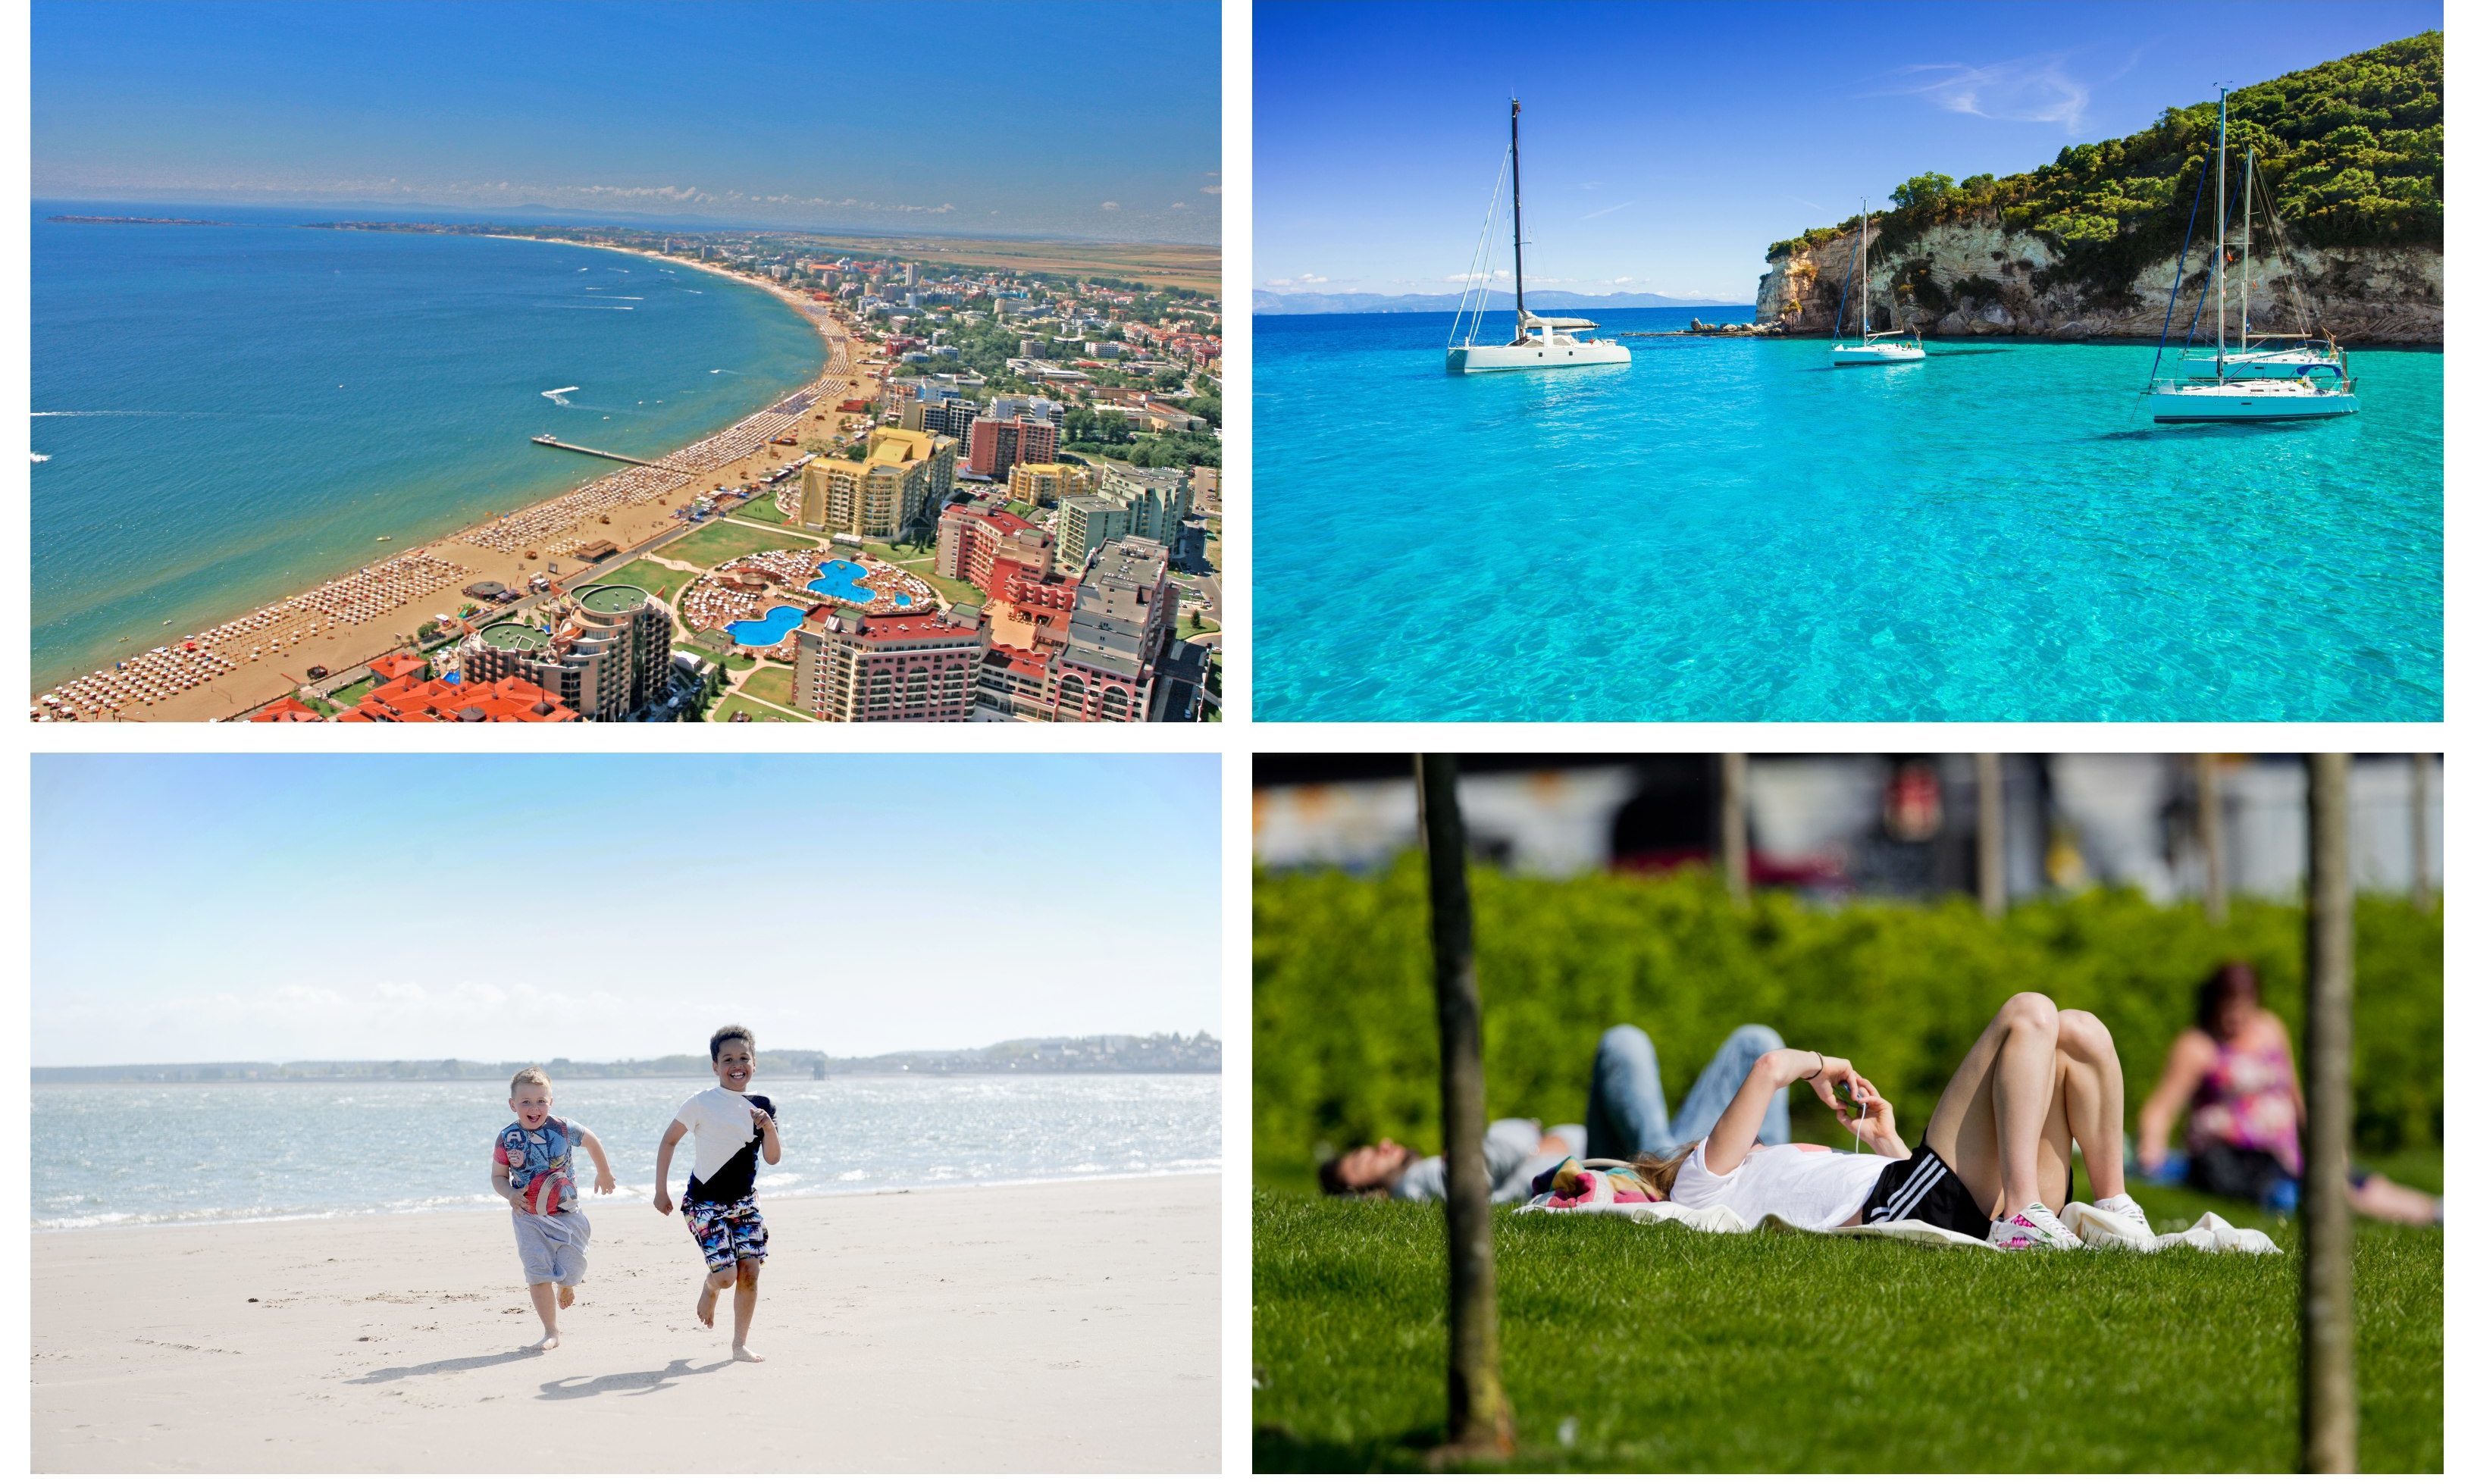 Scotland could be hotter than Sunny Beach, Bulgaria (top left) and Corfu (top right). Also pictured: Broughty Ferry beach (bottom left) and sunbathers in Glasgow  (bottom right).